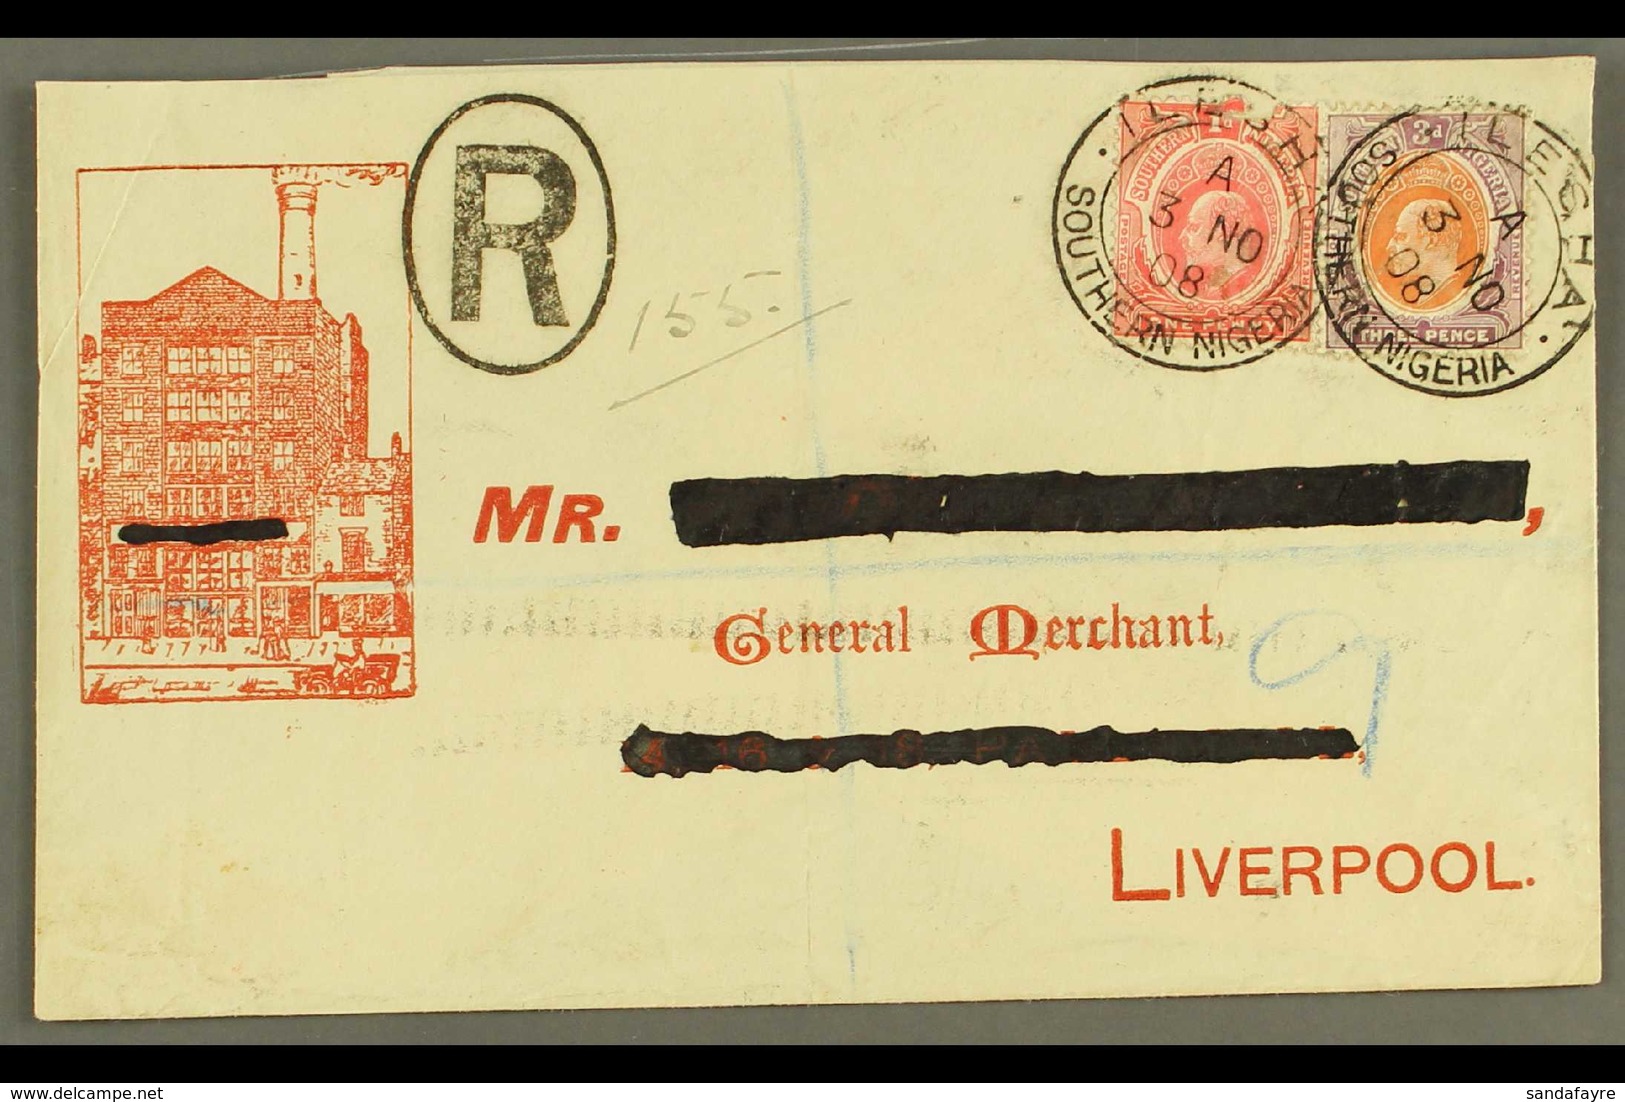 1908 Illustrated Registered Commercial Cover To Liverpool Franked Ed VII 1d And 3d Tied By Crisp Strikes Of ILESHA South - Nigeria (...-1960)